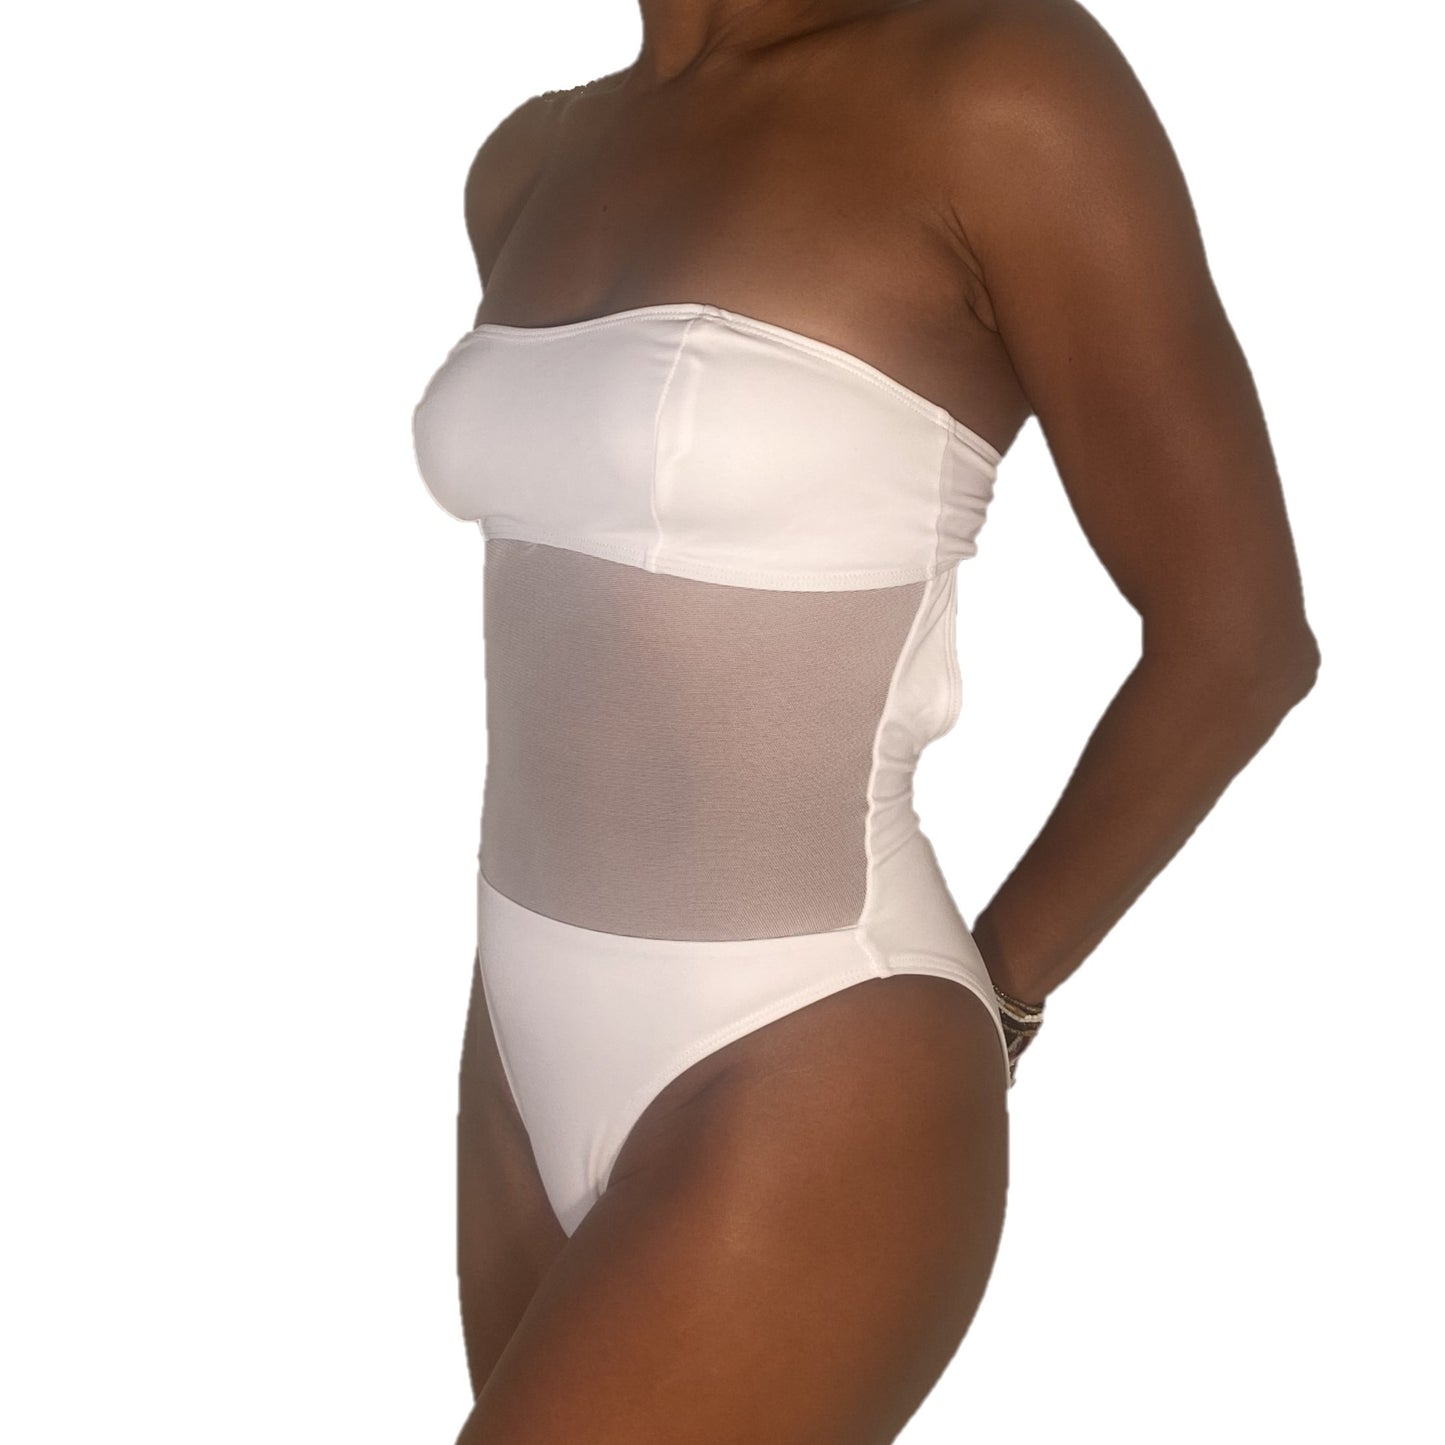 Leme Mesh One Piece Swimsuit in white